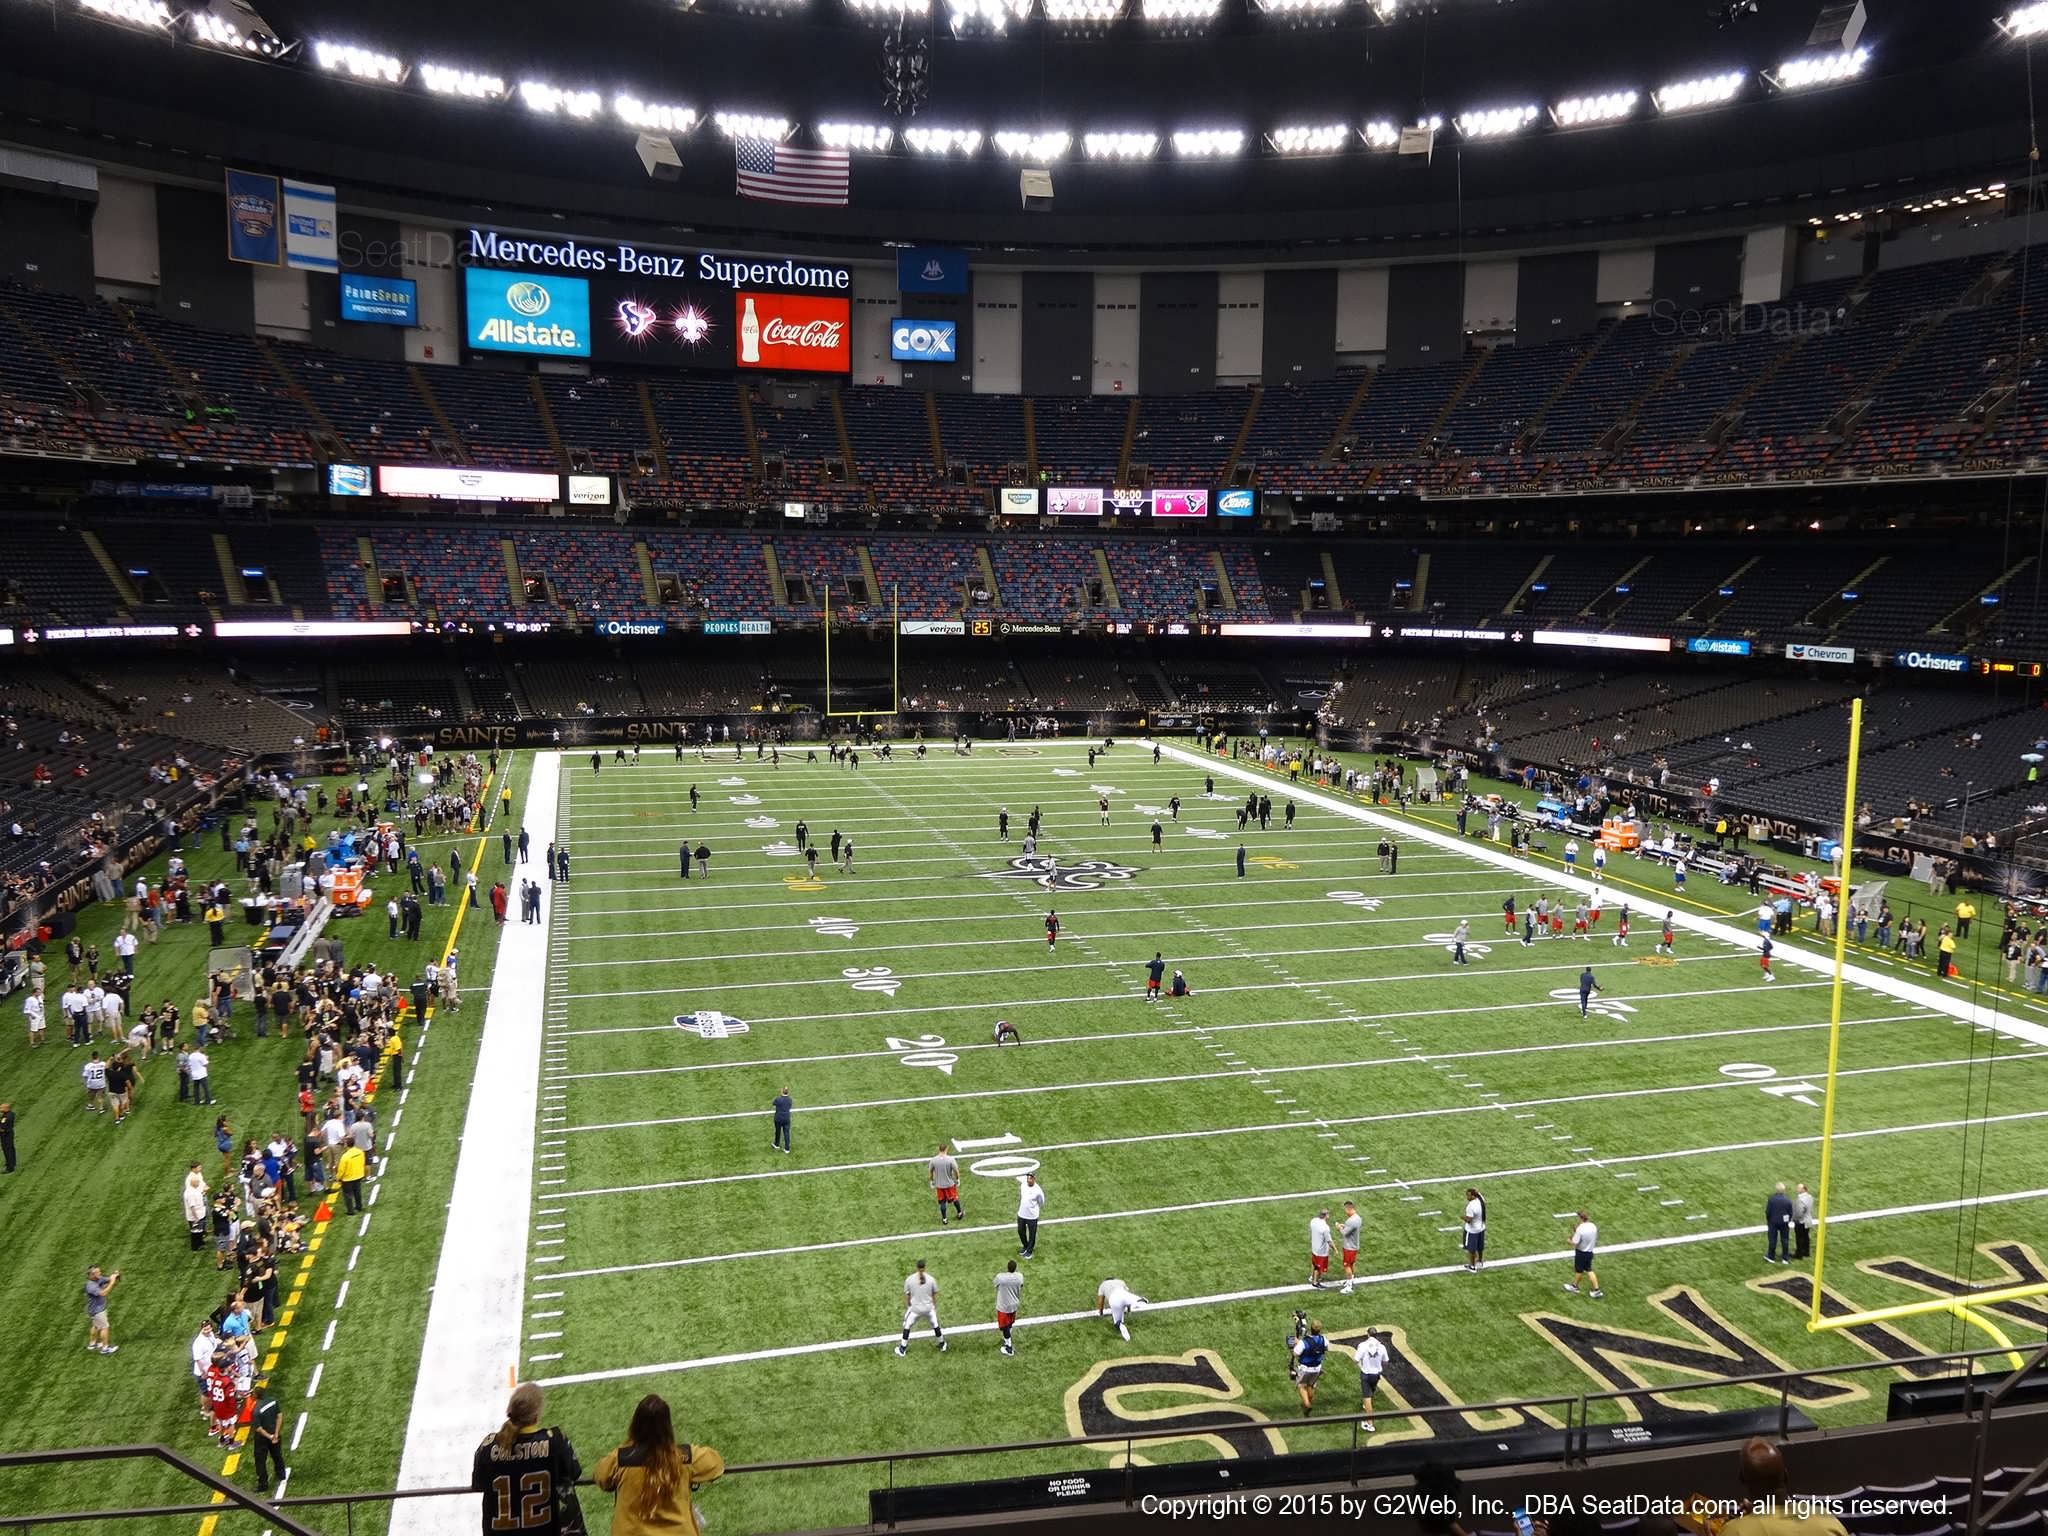 Seat view from section 302 at the Mercedes-Benz Superdome, home of the New Orleans Saints